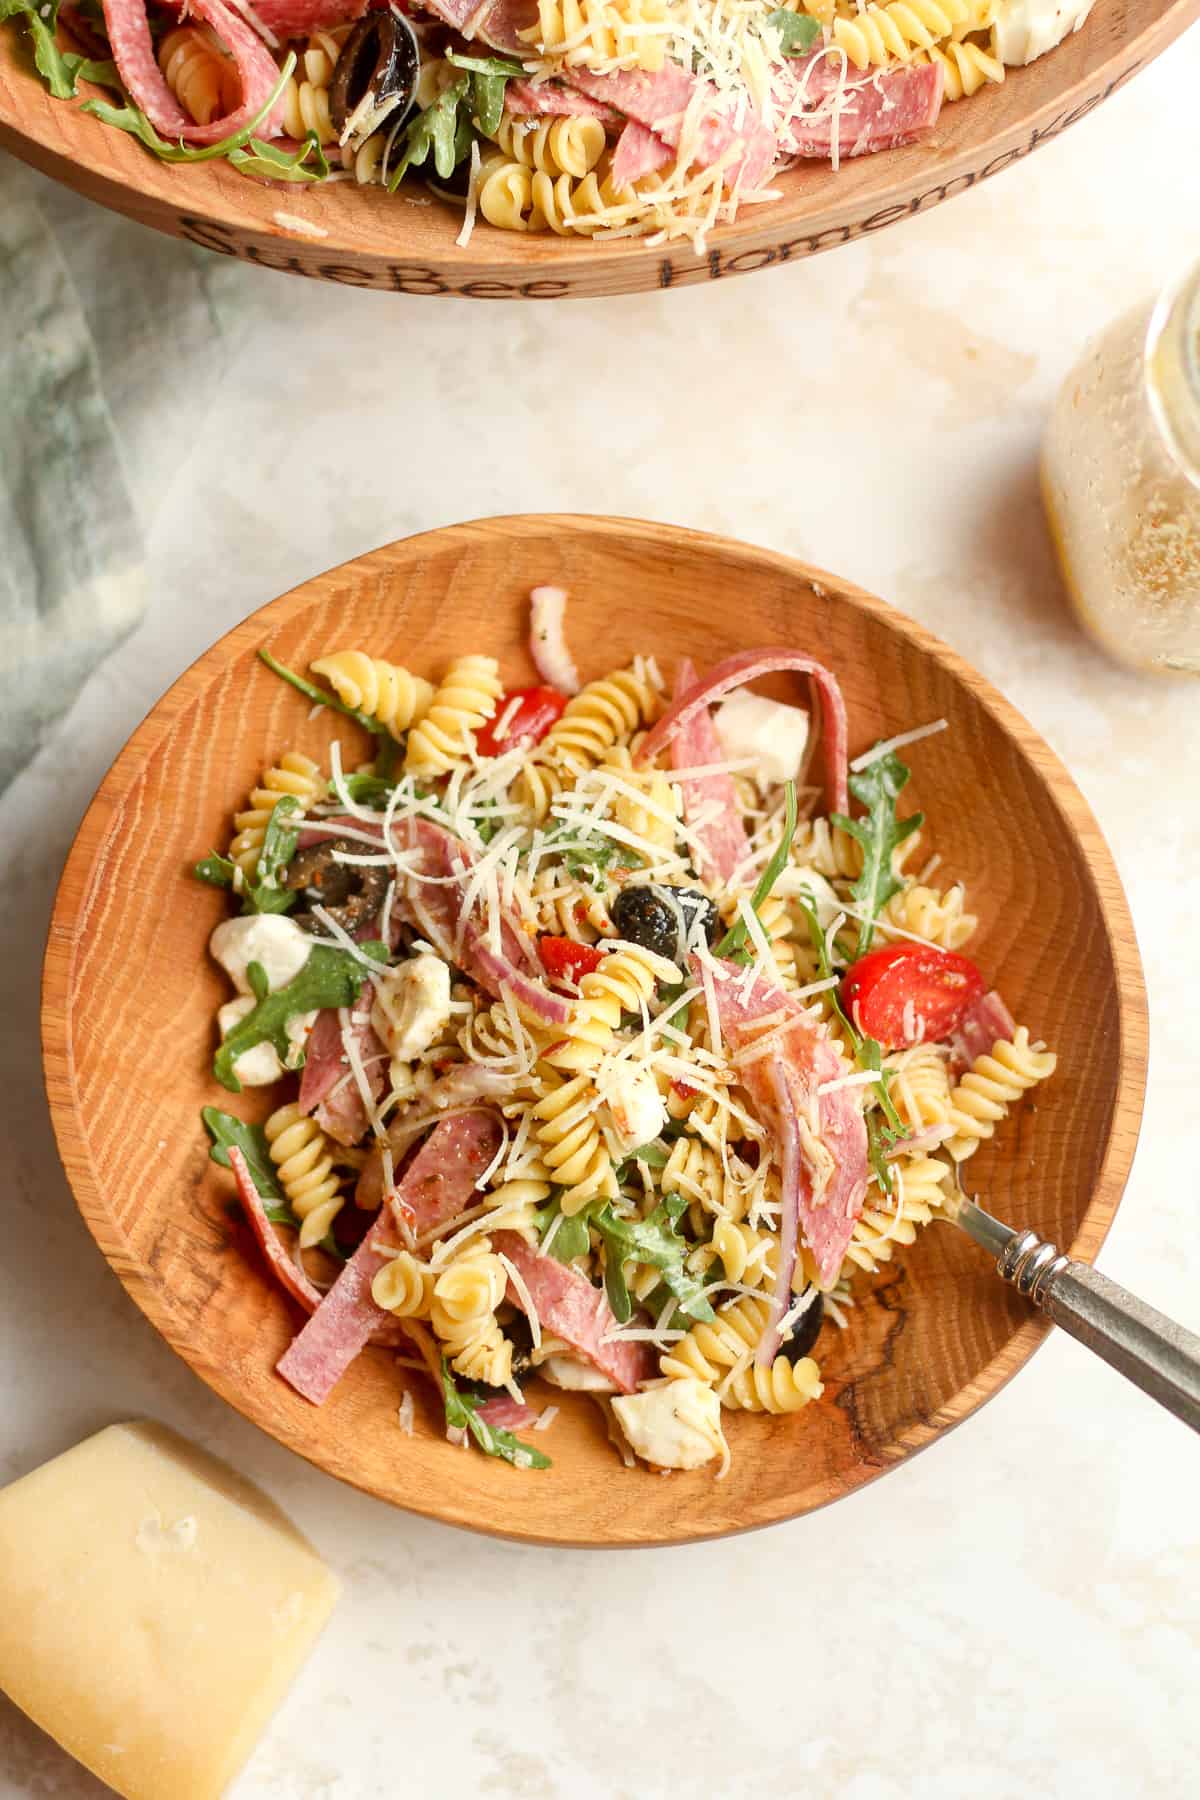 A serving bowl of the zesty pasta salad with a fork.